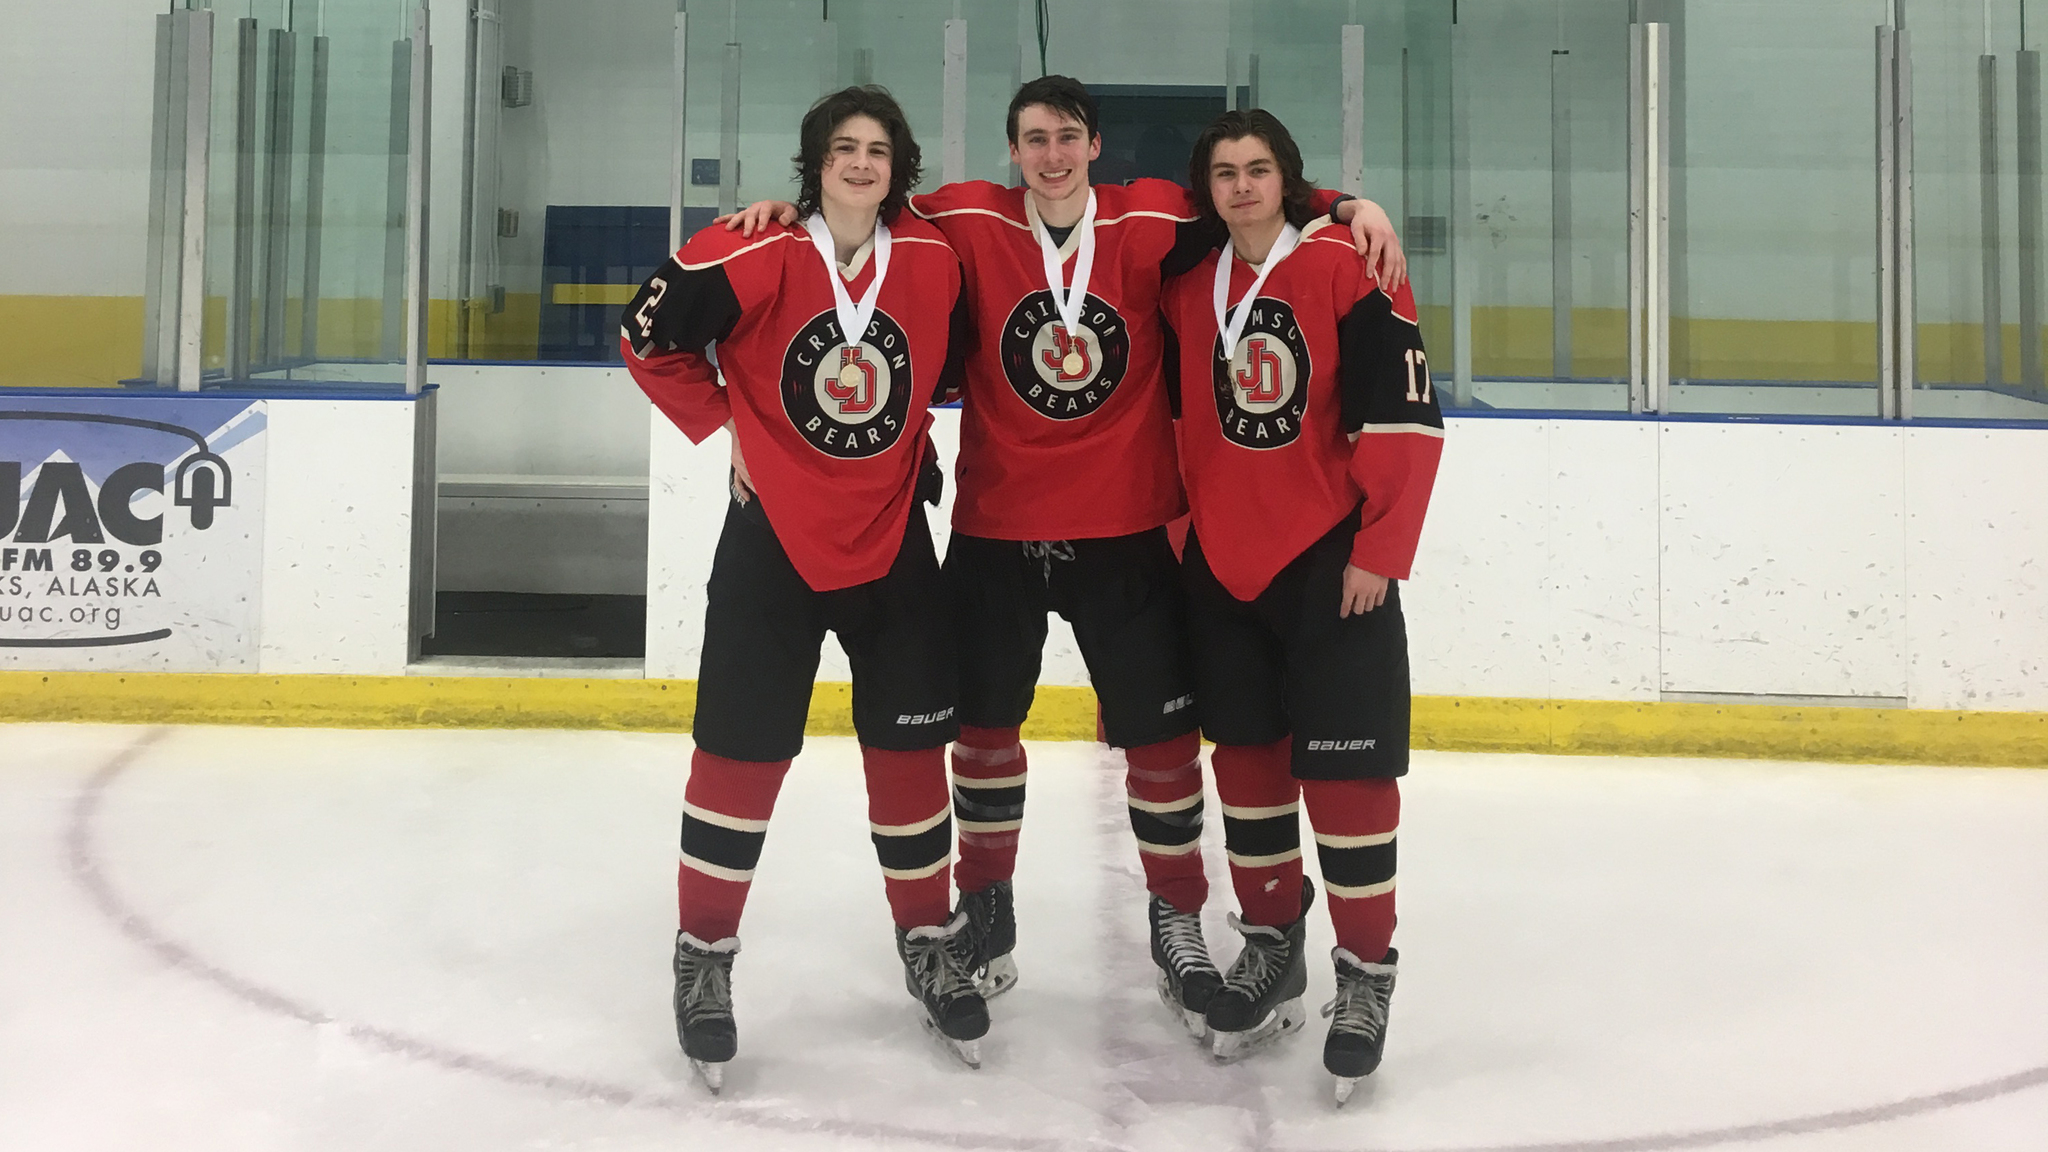 Left to right: Juneau-Douglas High School hockey’s Cameron Smith, Quin Gist and Billy Bosse pose together after being named to the all-conference tournament team Saturday in Fairbanks’ Patty Center Ice Arena. (Courtesy photo)